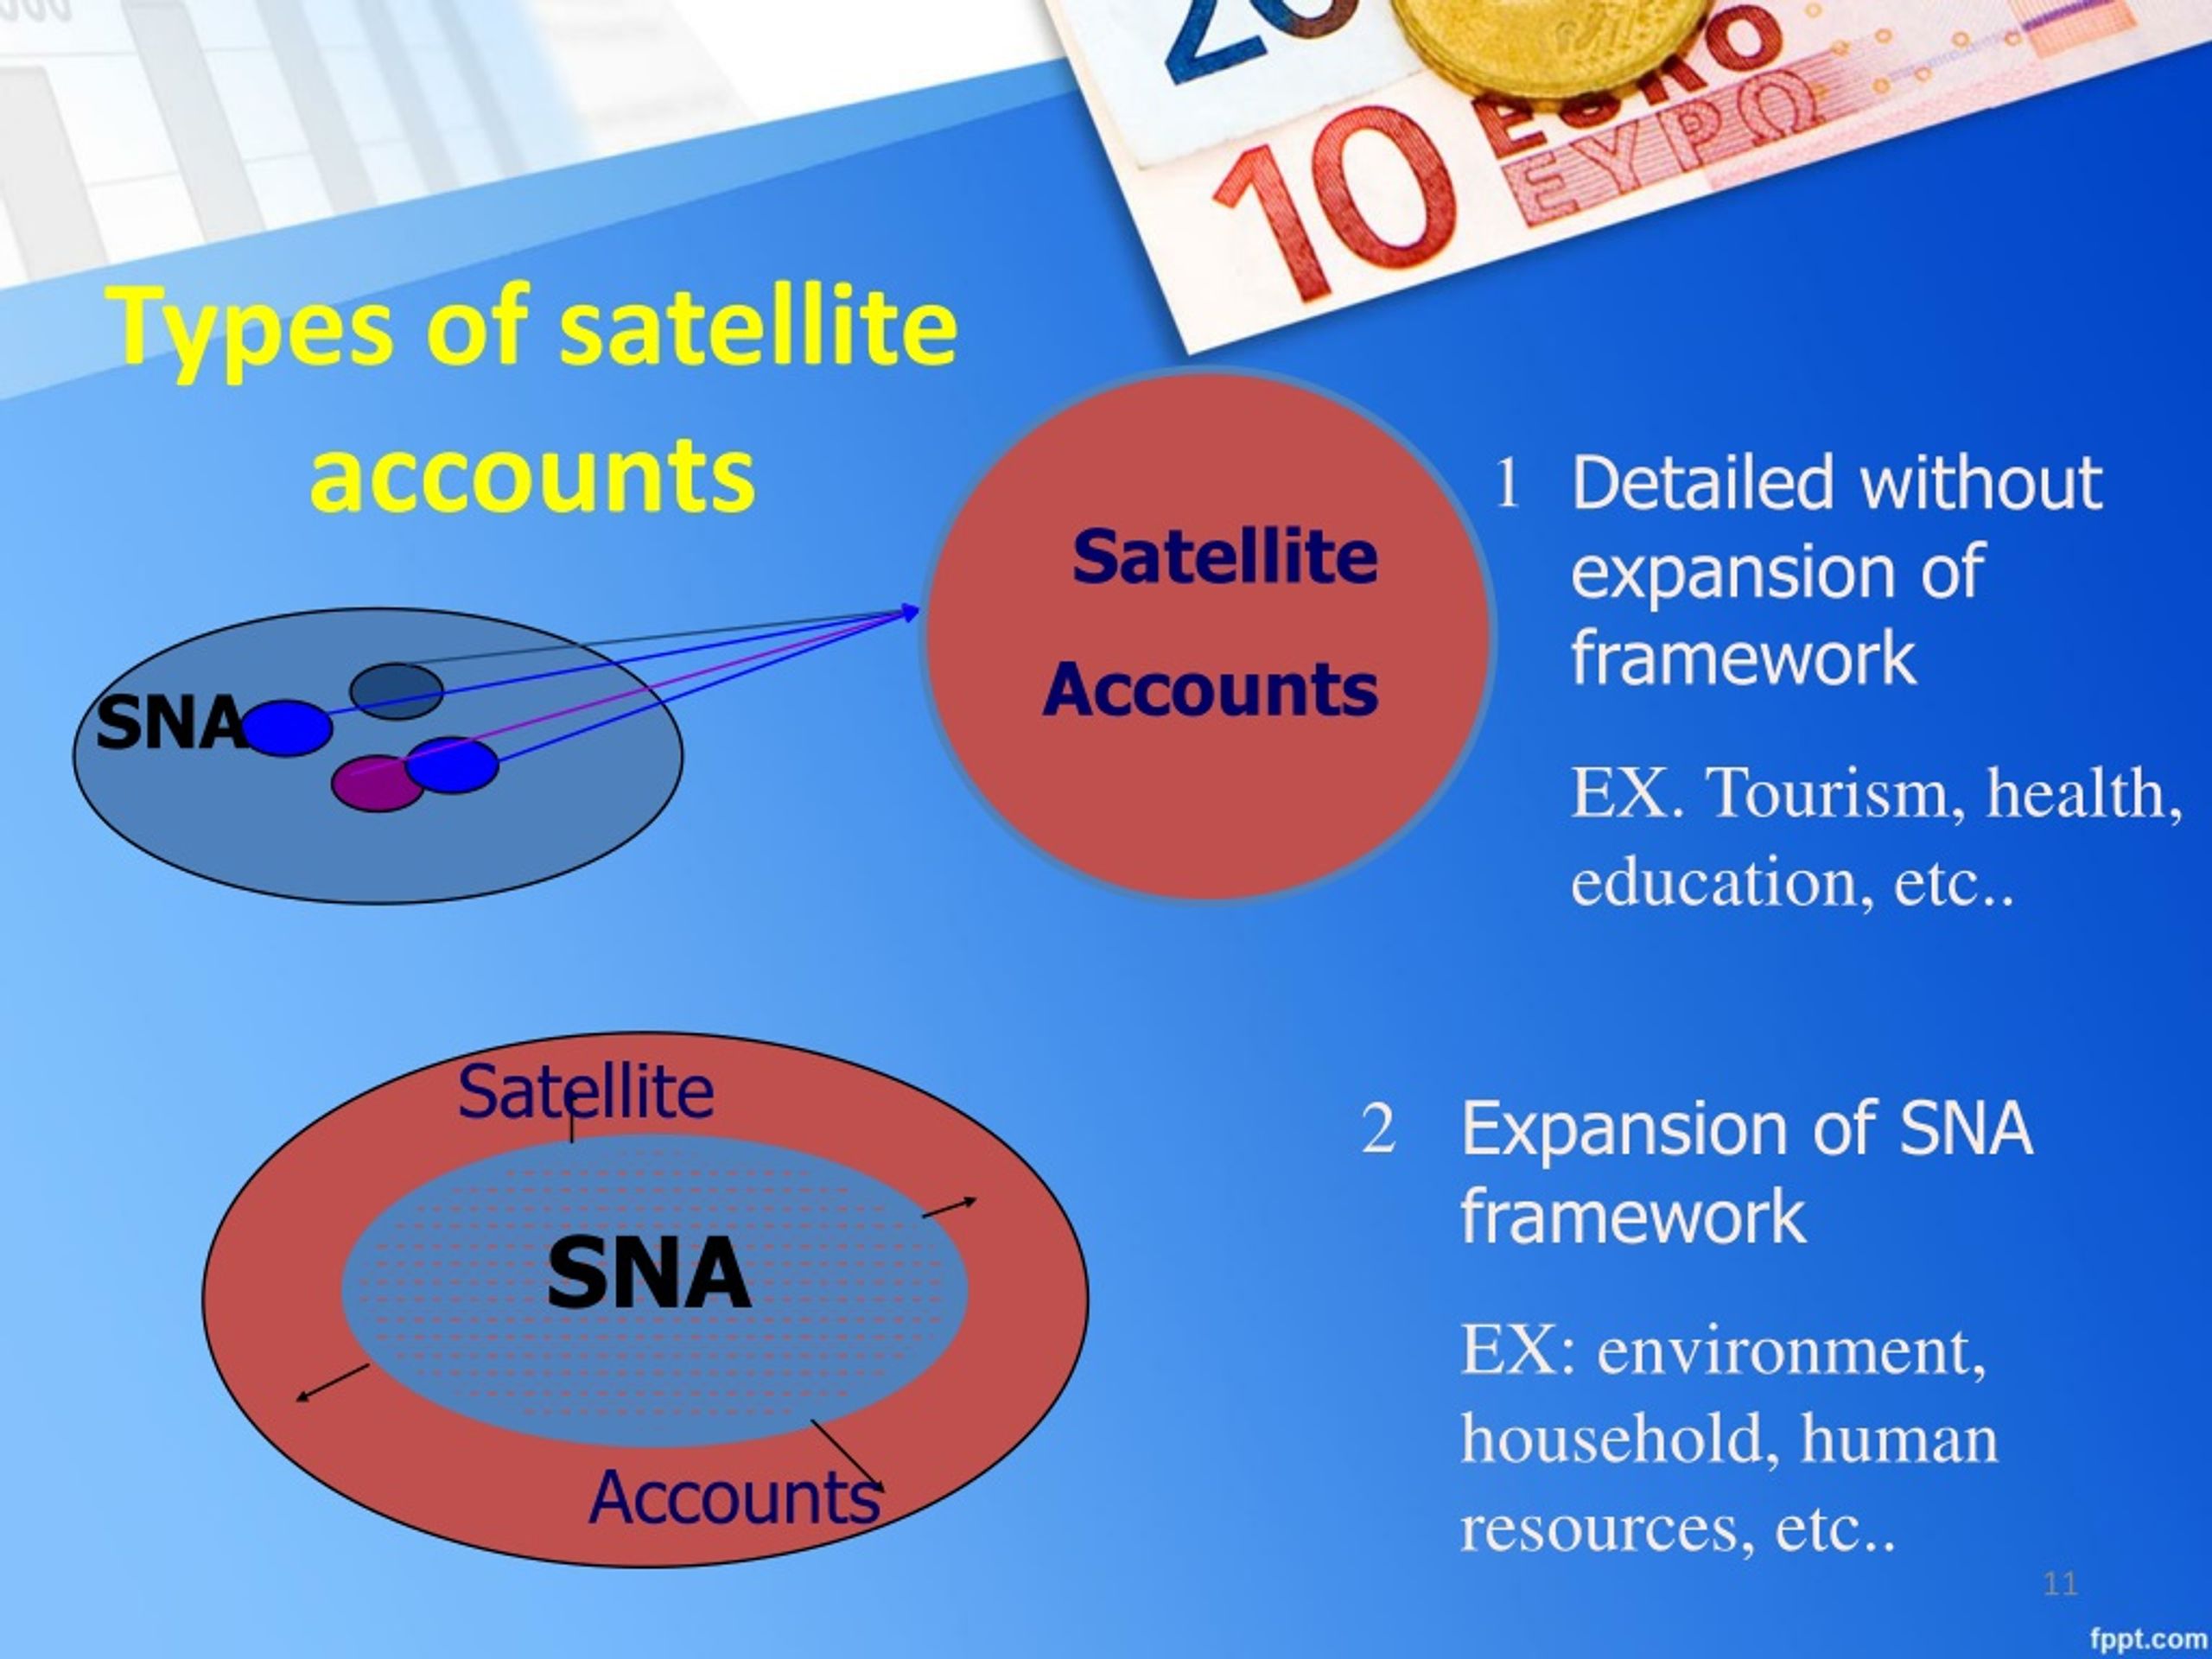 importance of tourism satellite account